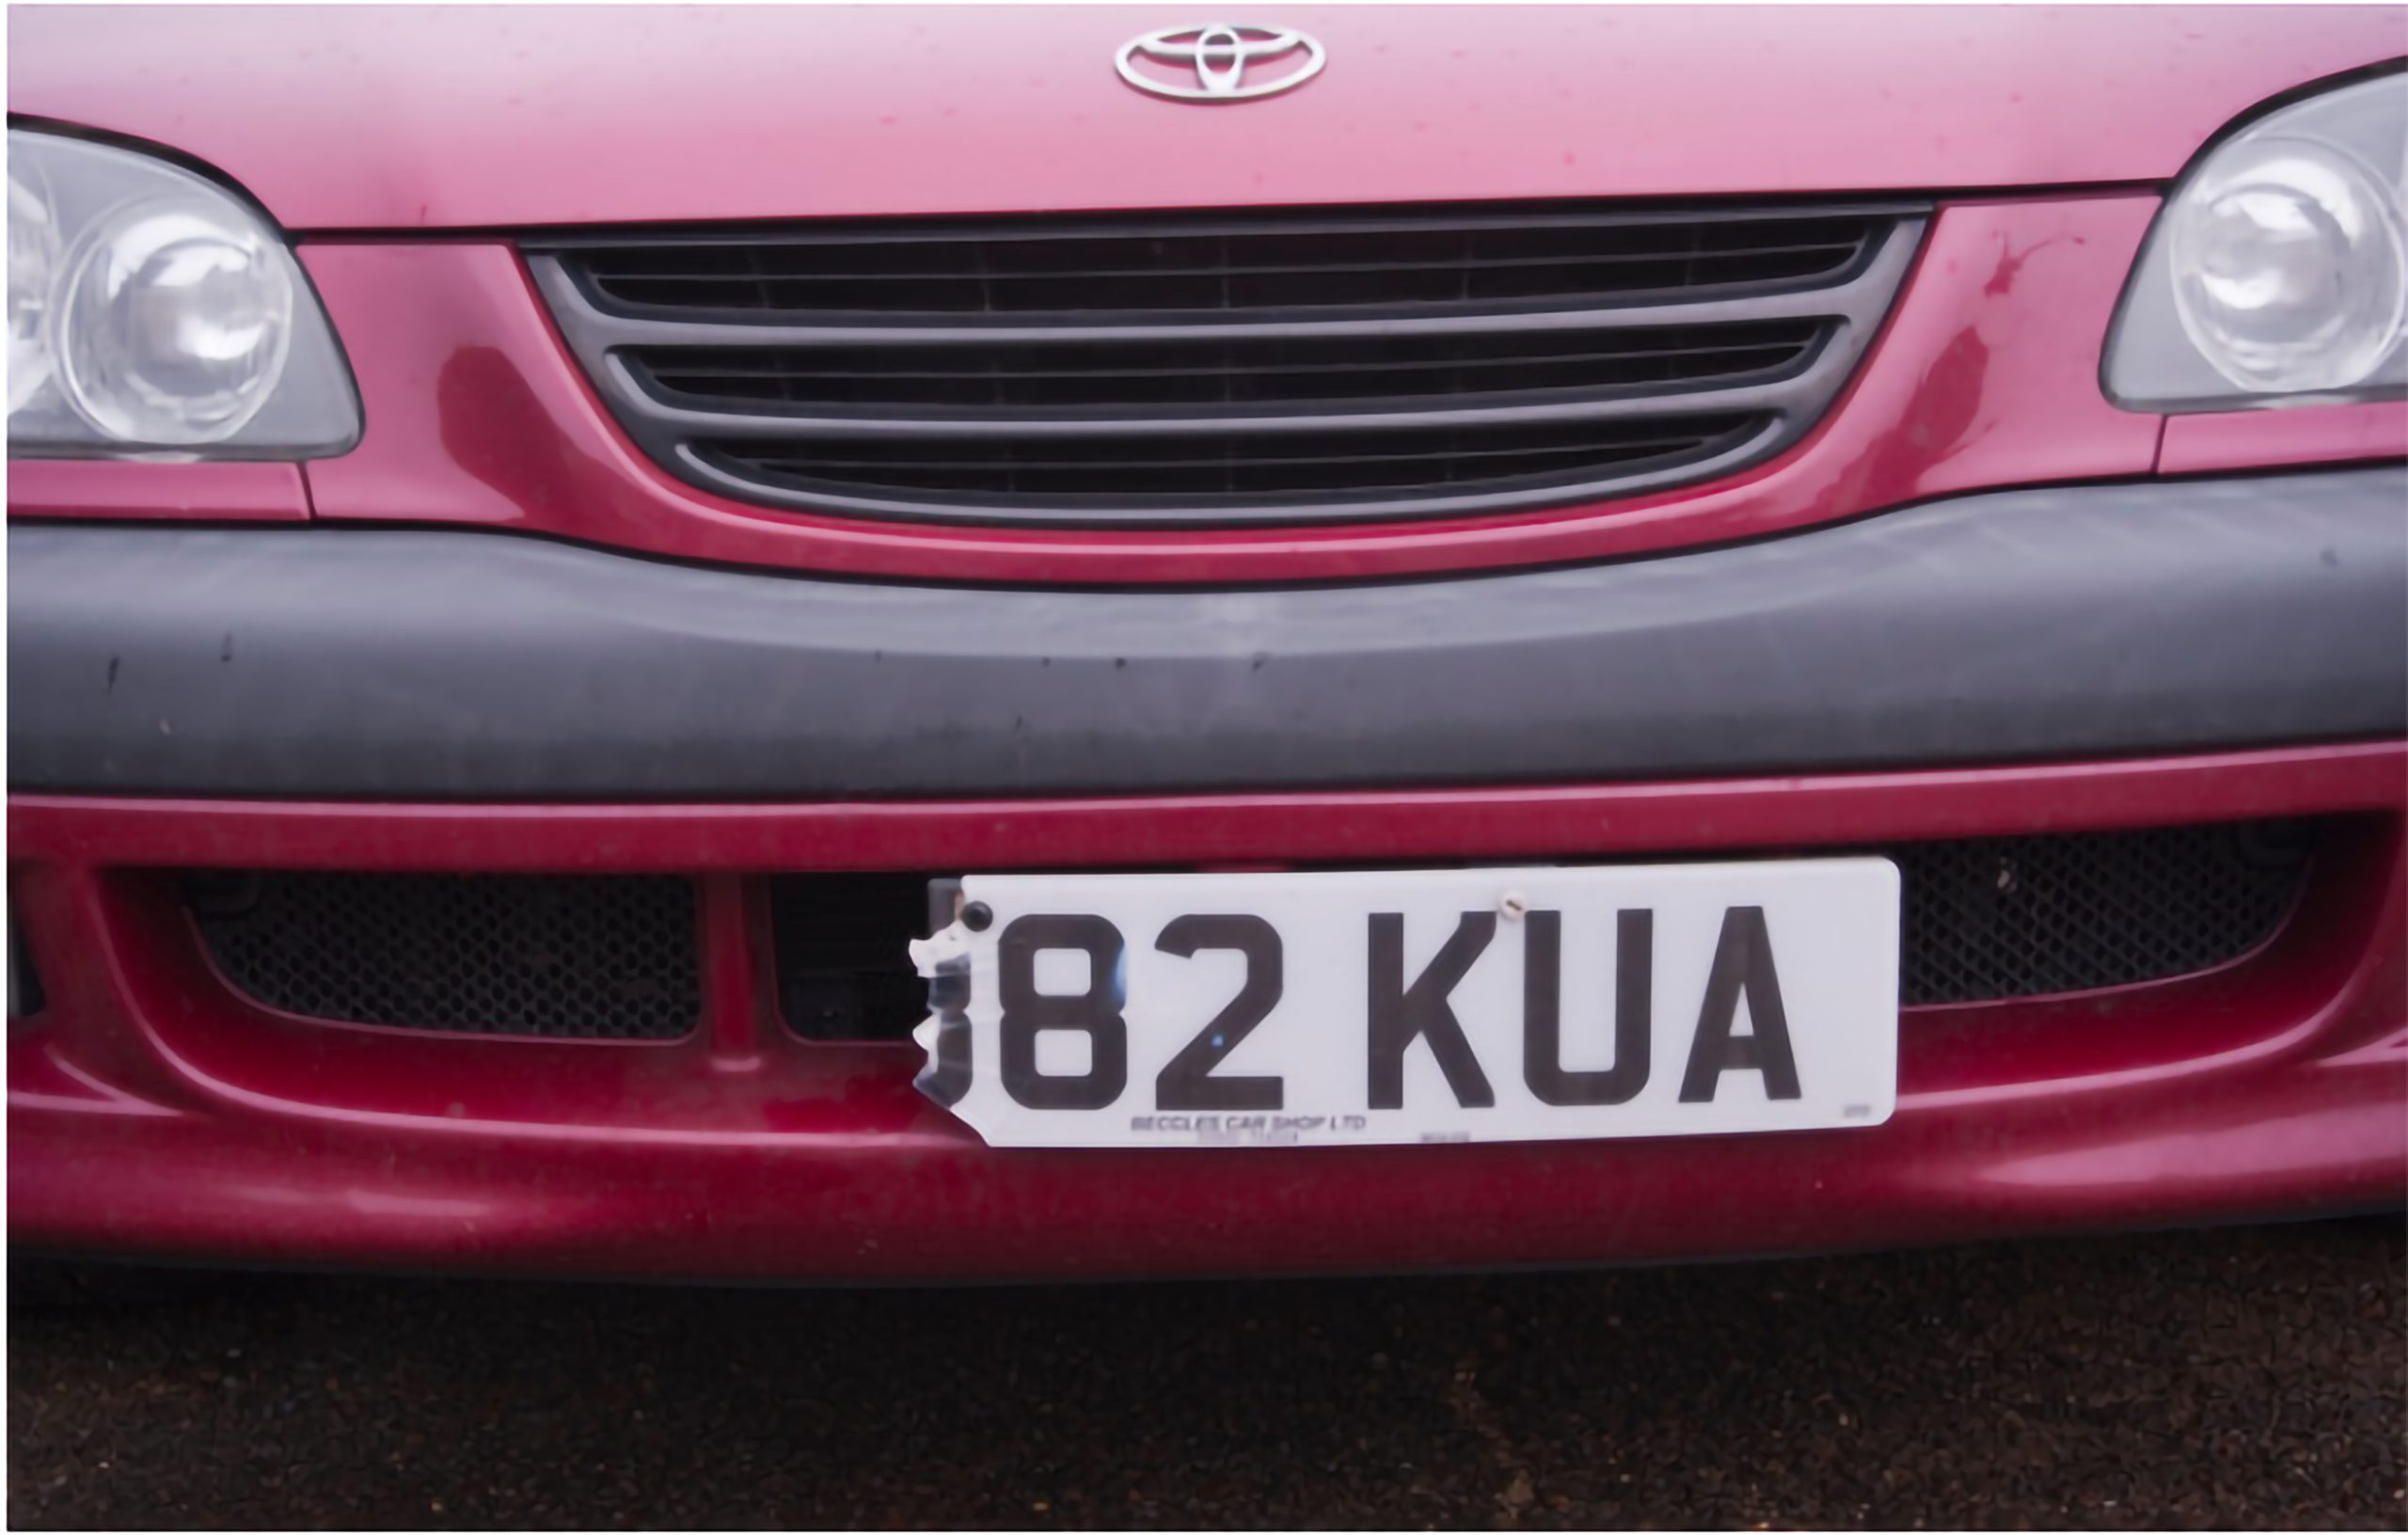 Cracked and damaged number plates which needs to be replaced